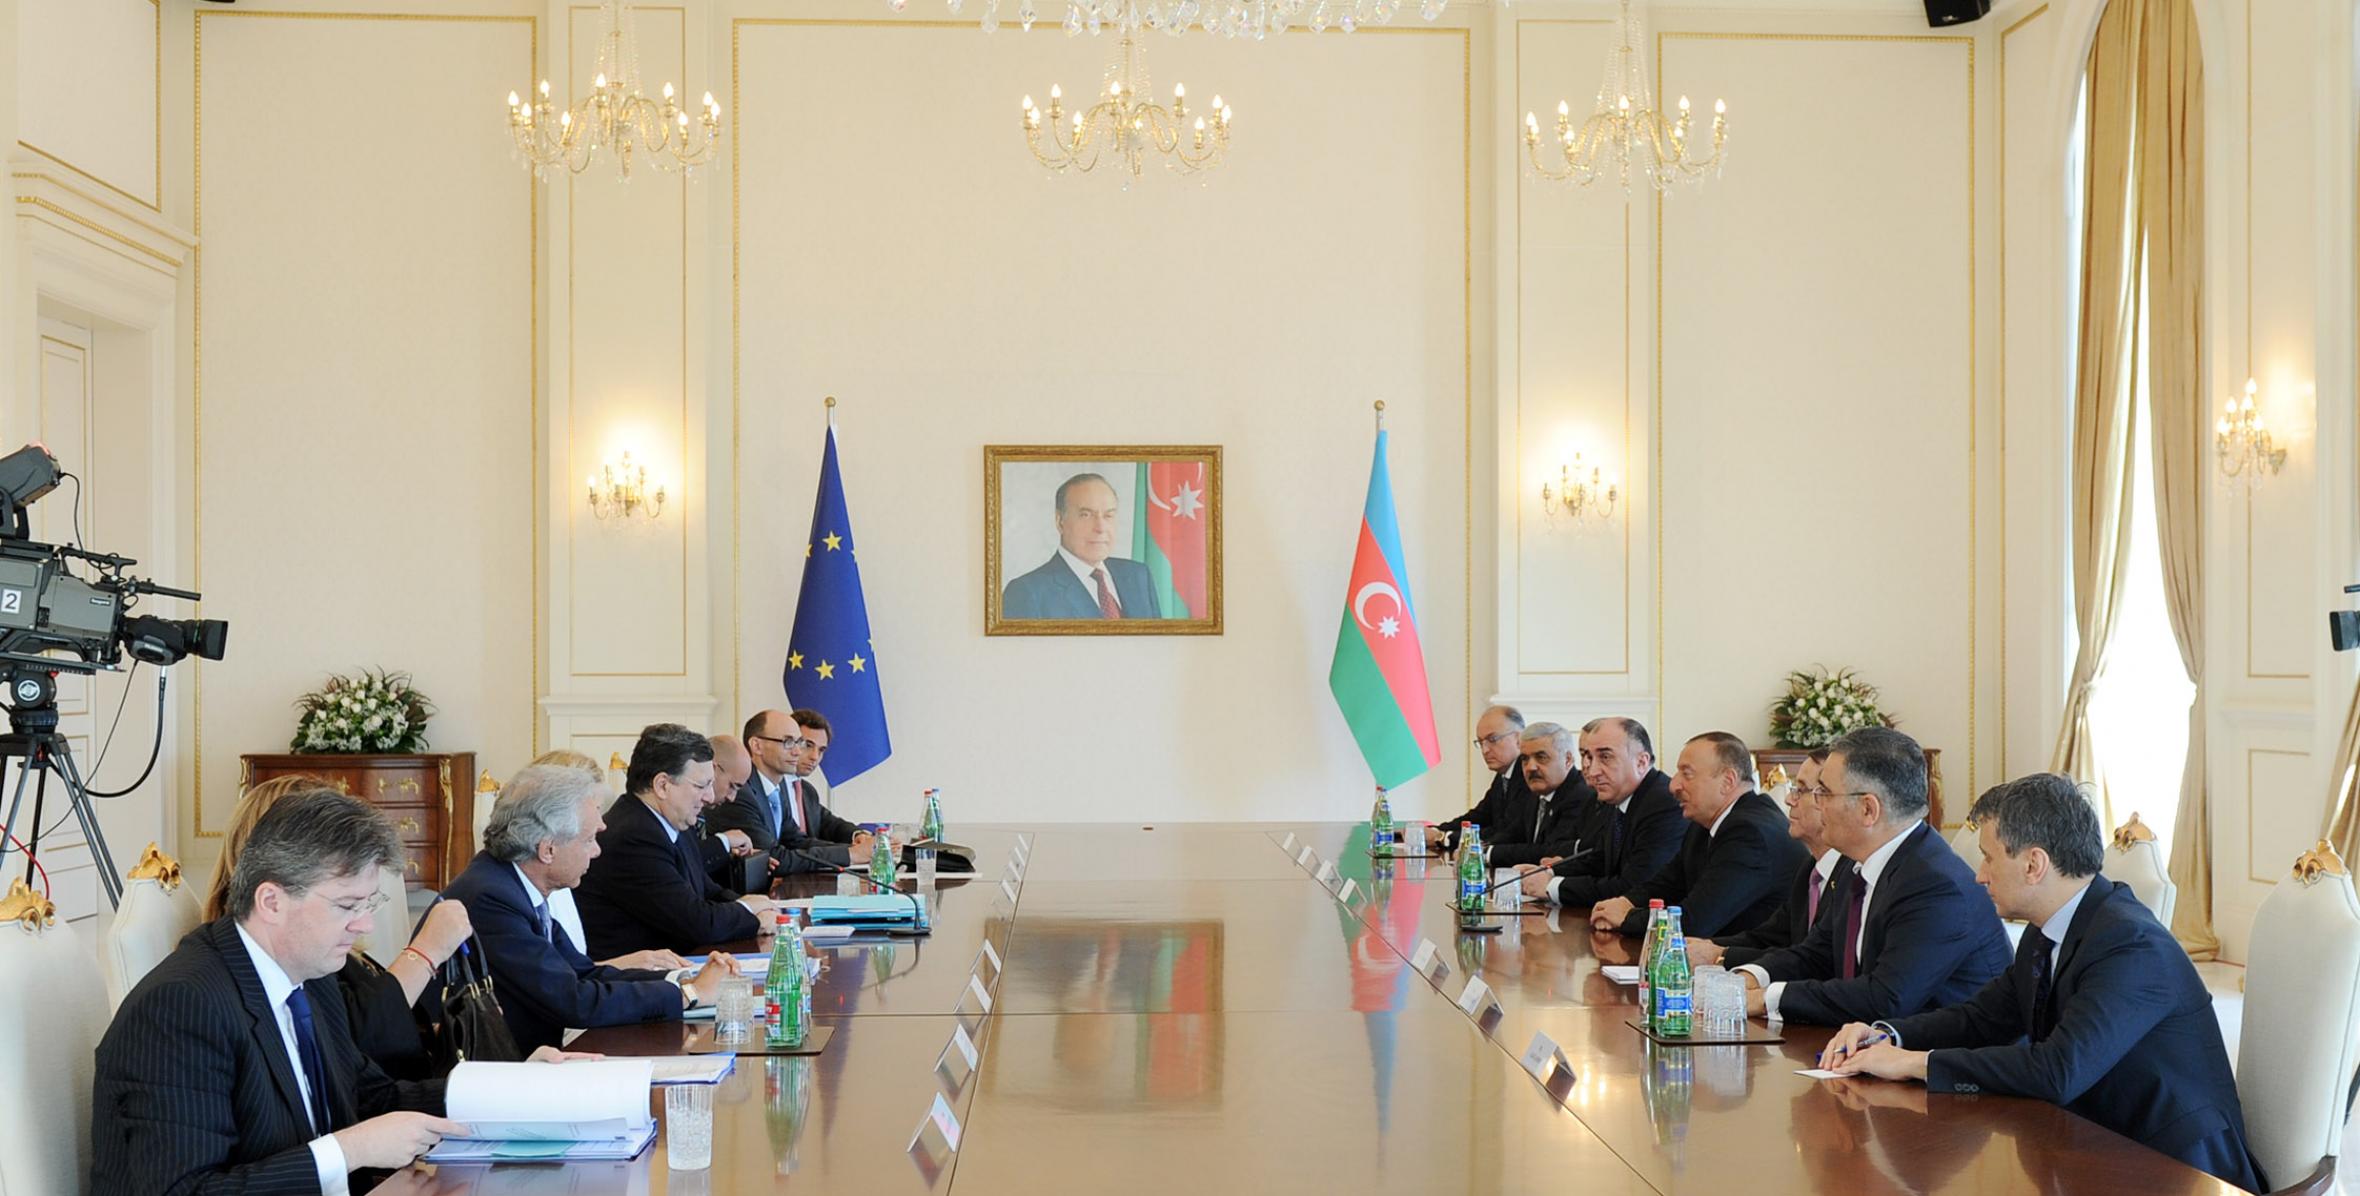 Ilham Aliyev and President of the European Commission Jose Manuel Barroso held a meeting in an expanded format